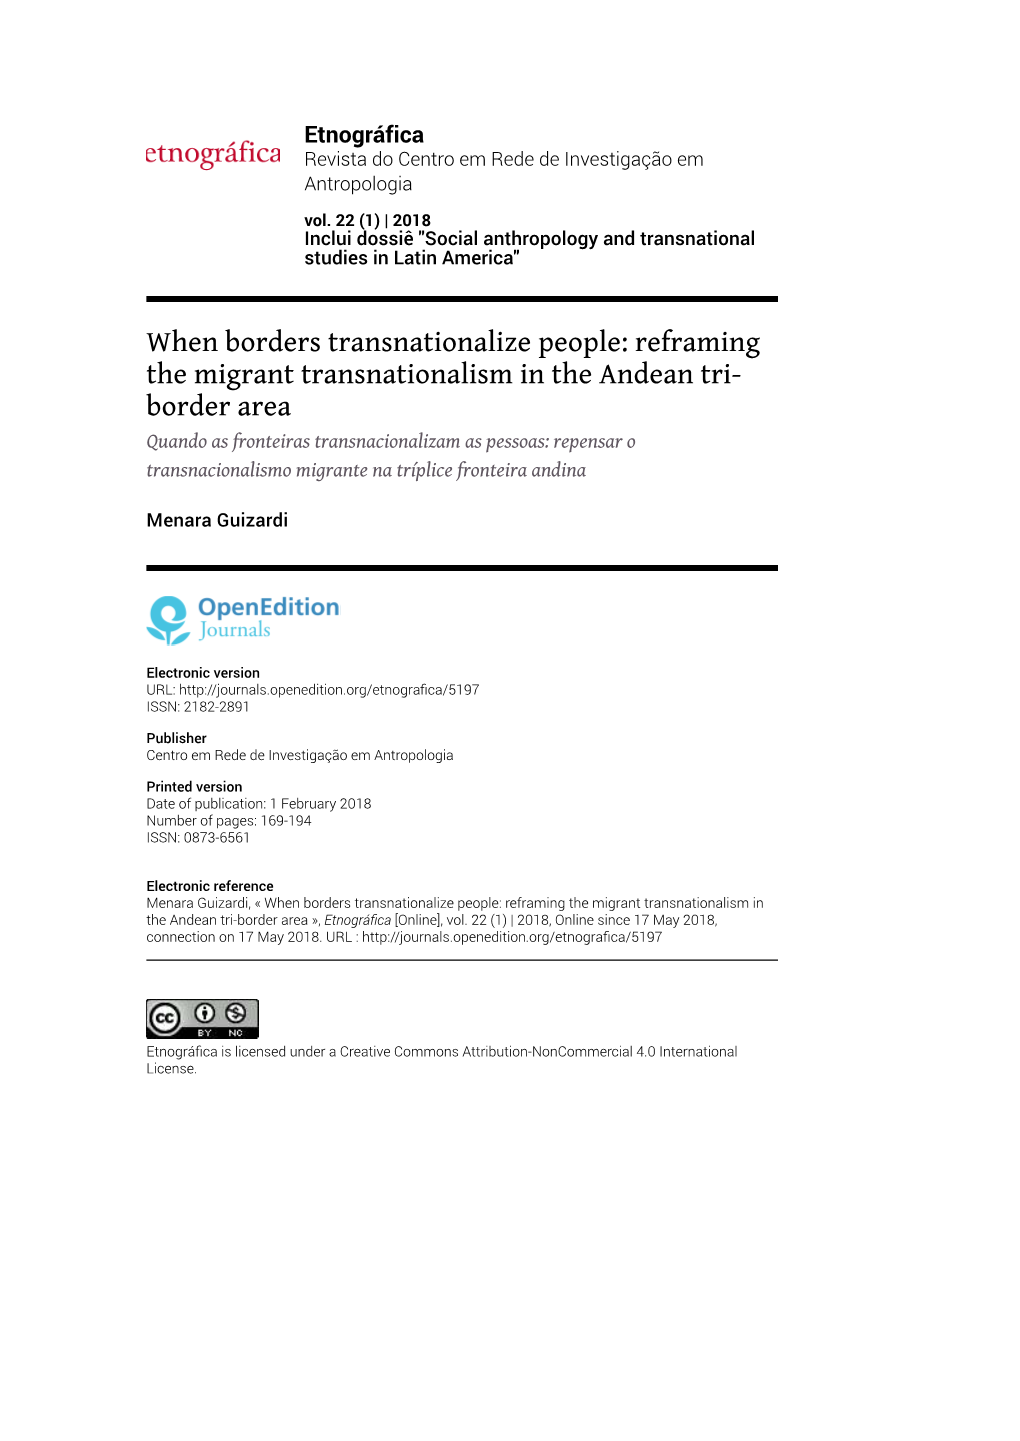 When Borders Transnationalize People: Reframing the Migrant Transnationalism in the Andean Tri-Border Area », Etnográﬁca [Online], Vol